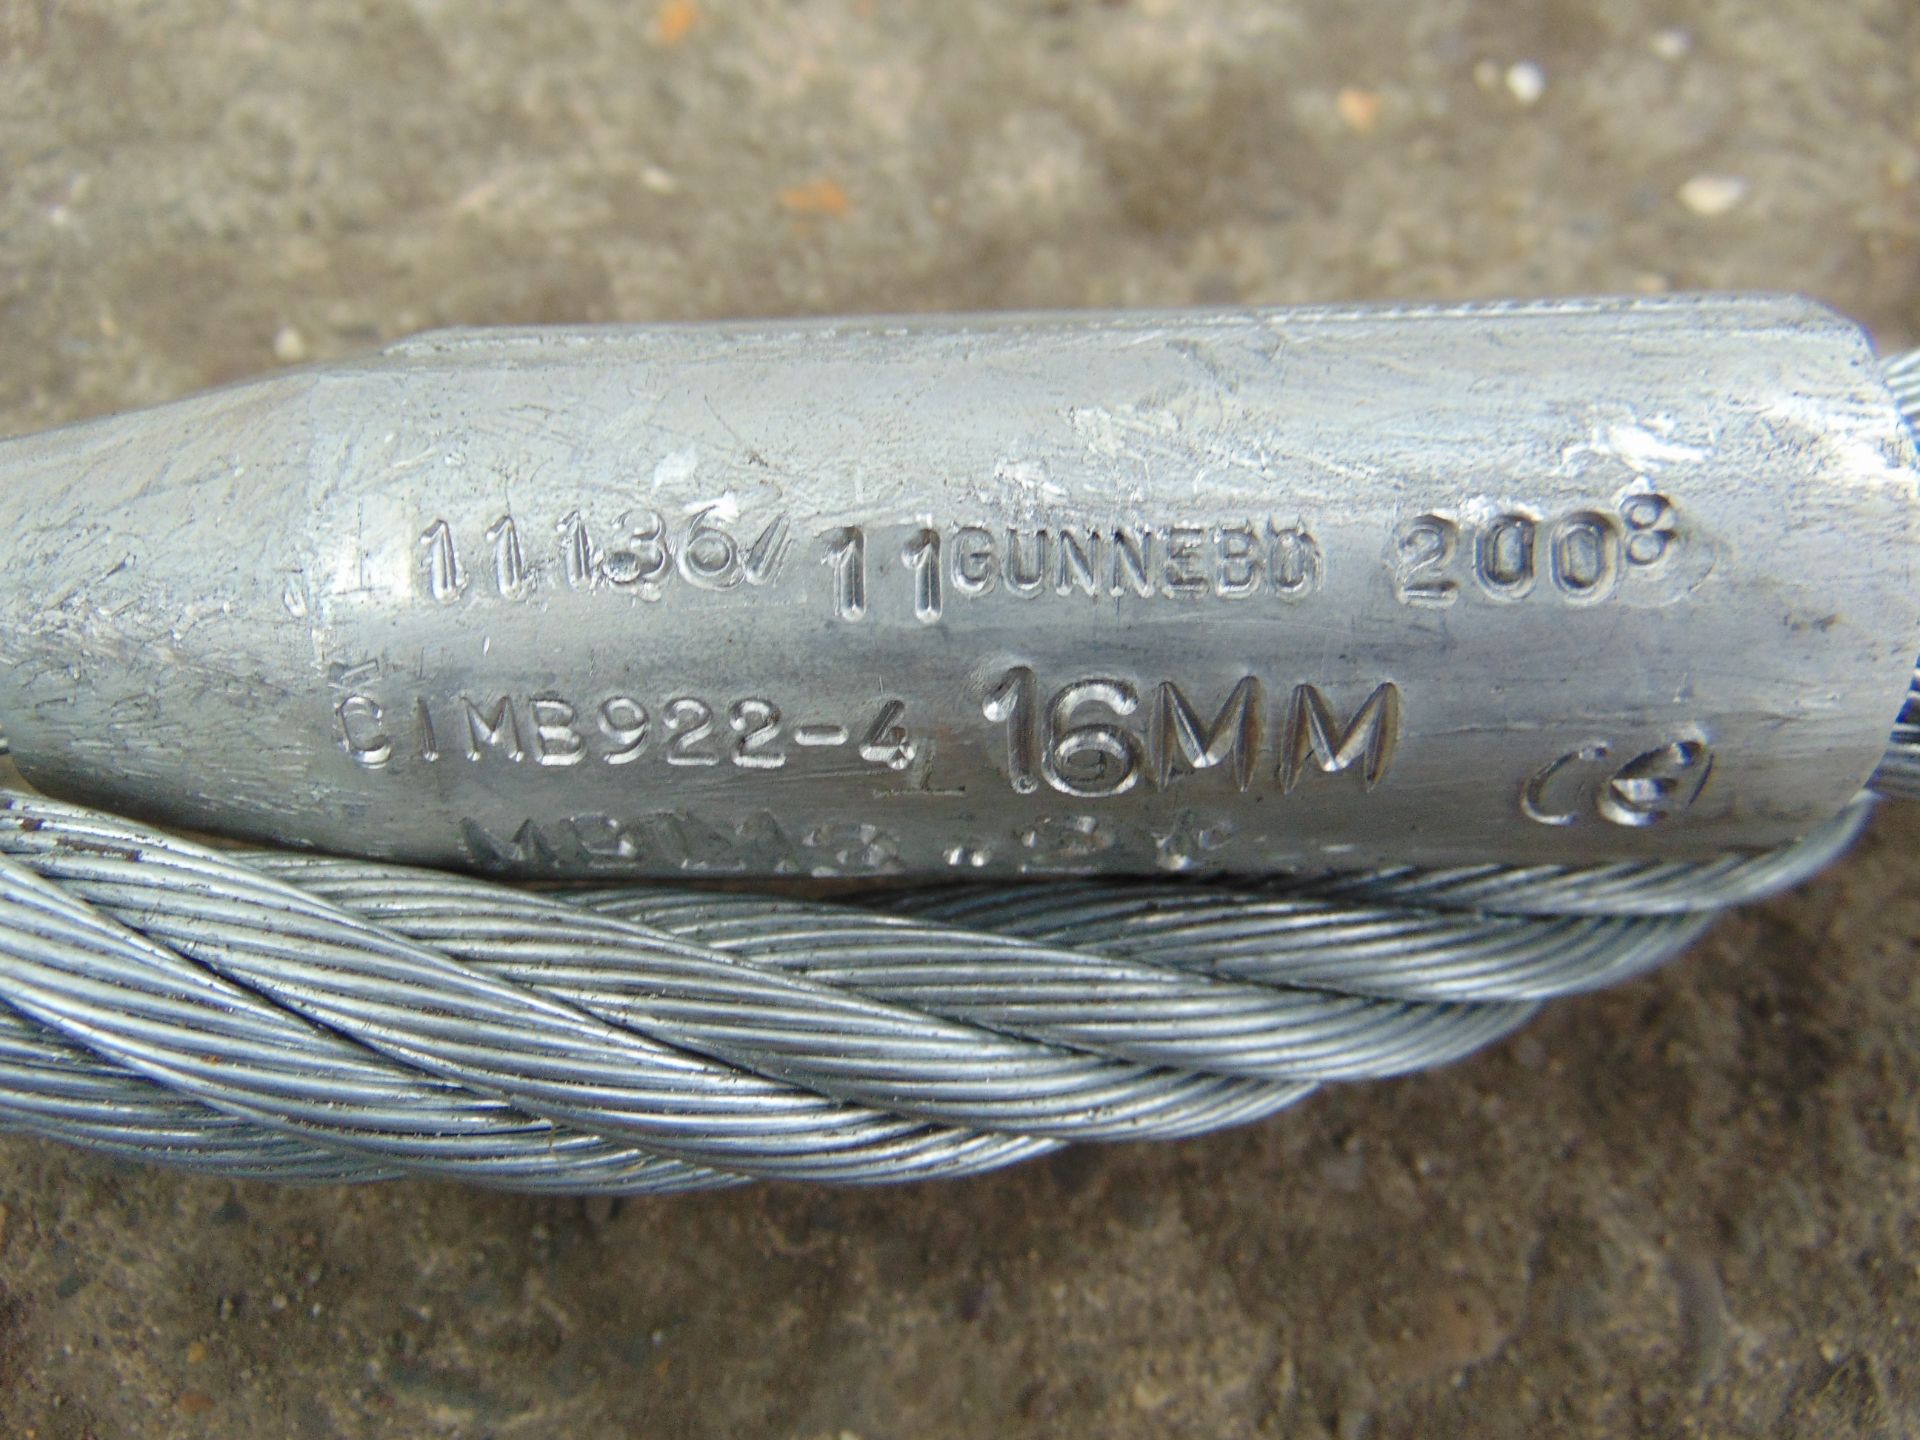 2x Unissued Gunnebo 16mm 13.2 Ton Wire Rope and Chain assys - Image 4 of 5